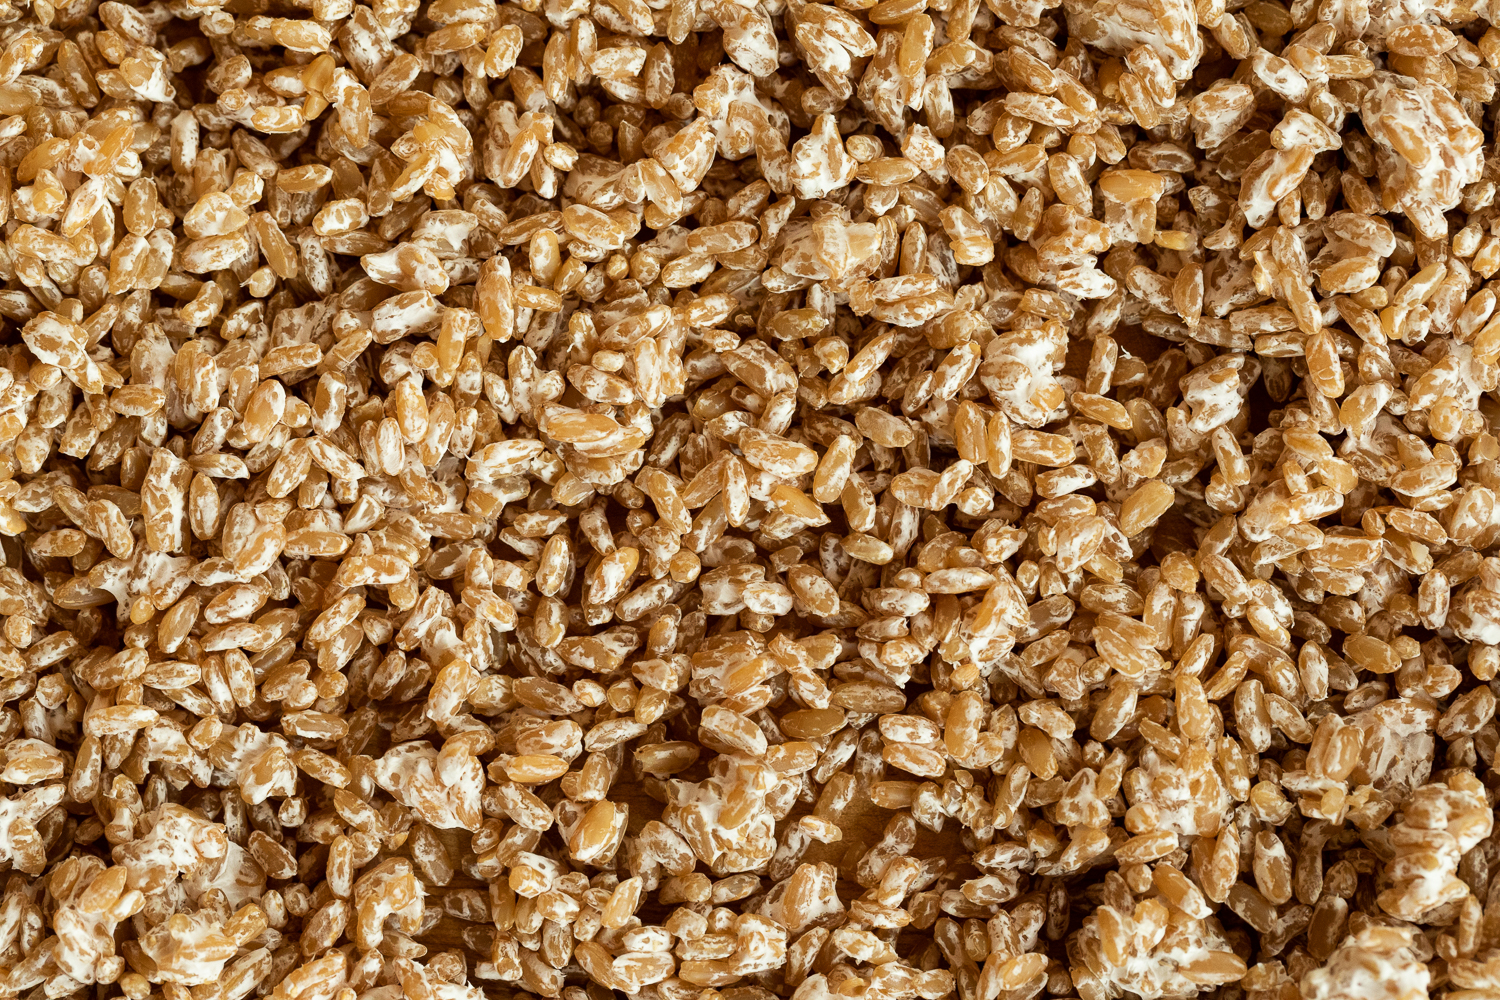 Close-up image of unprocessed, whole grain wheat berries with a natural brown color and a slightly shiny appearance.